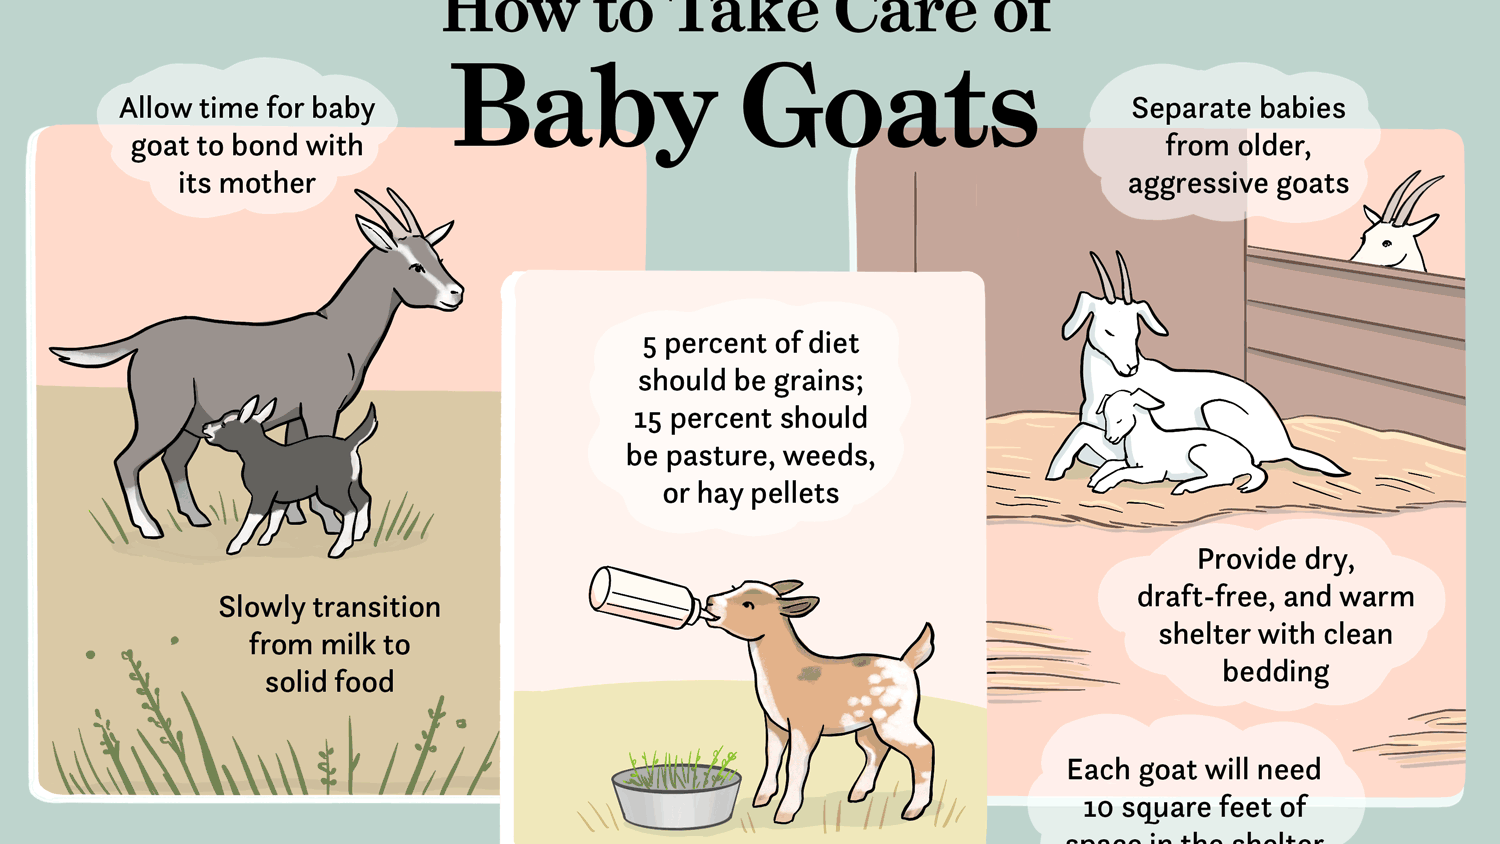 How to take care of a baby goat?